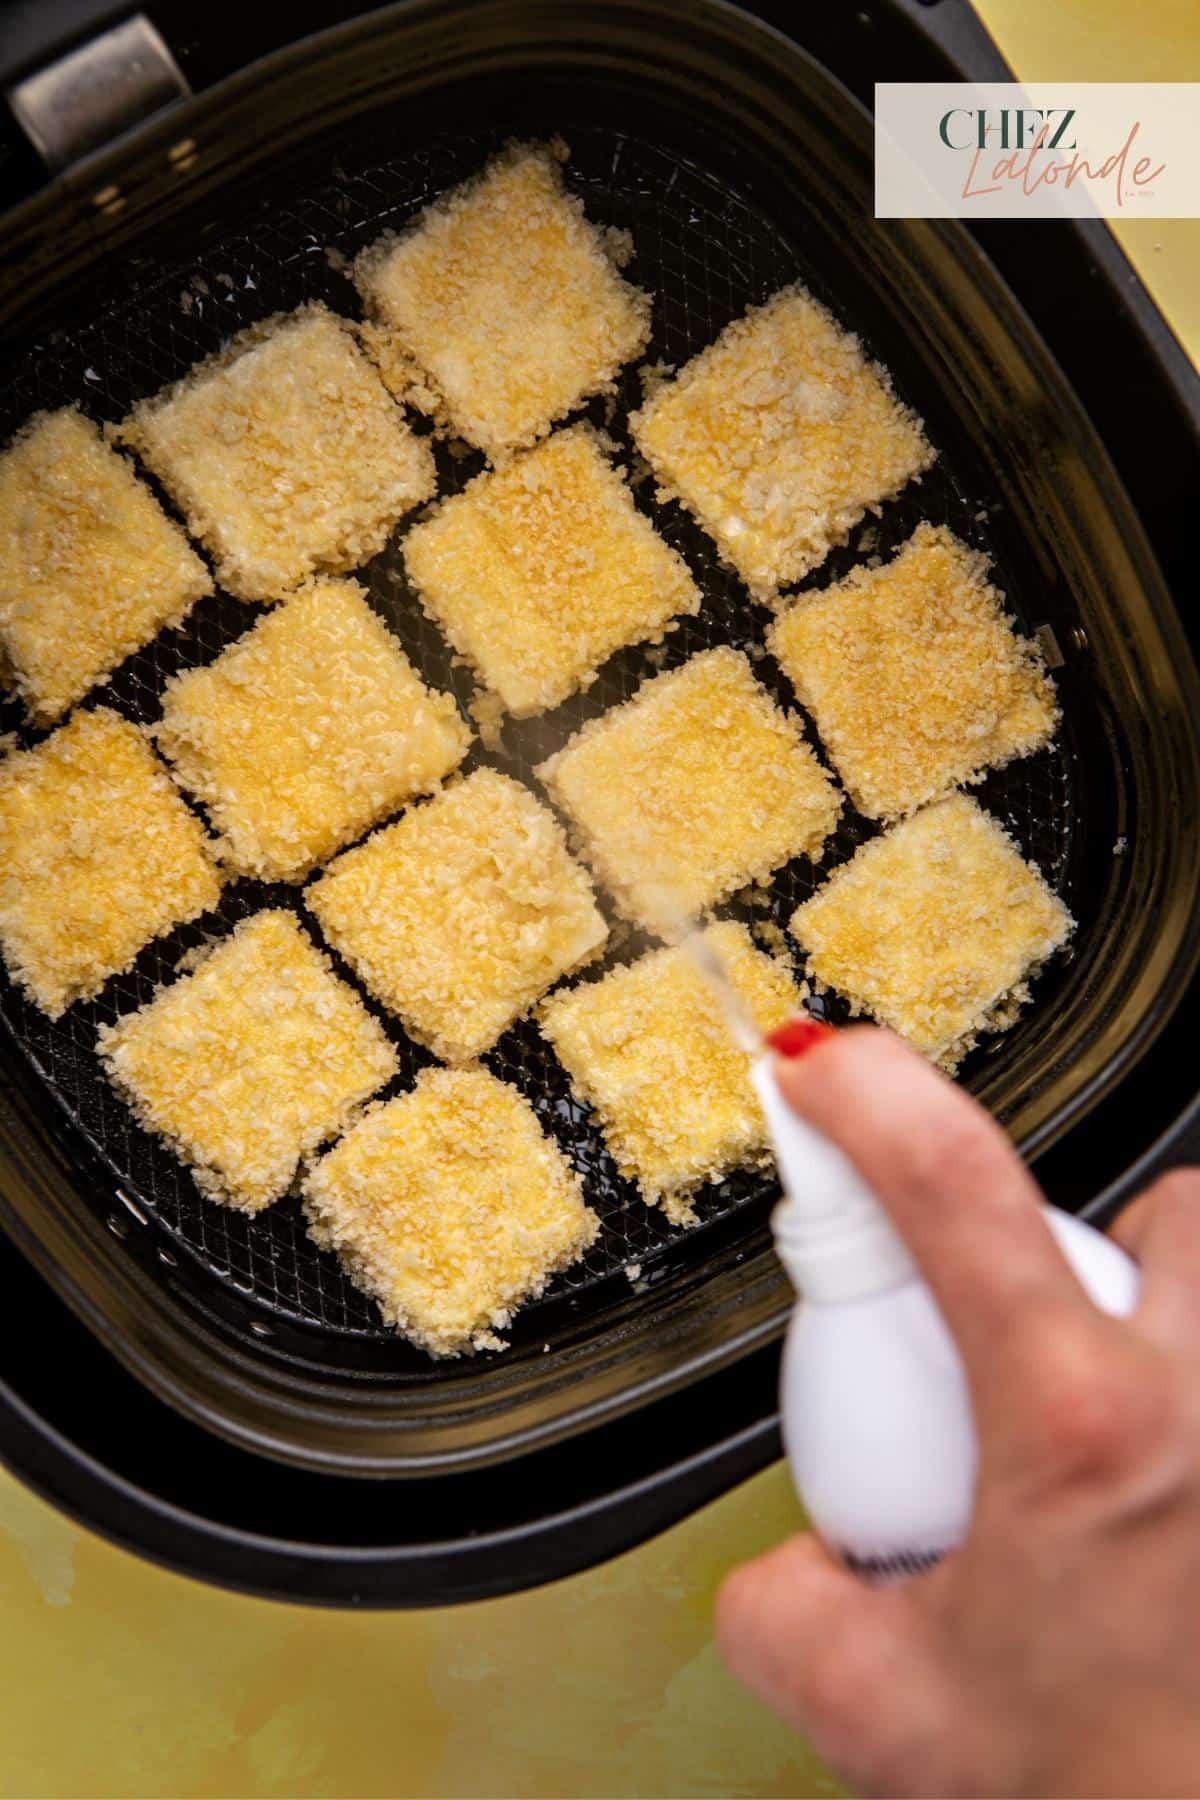 After placing tofu inside the air frying basket. Spray a thin coat of cooking spray to prevent it from sticking.